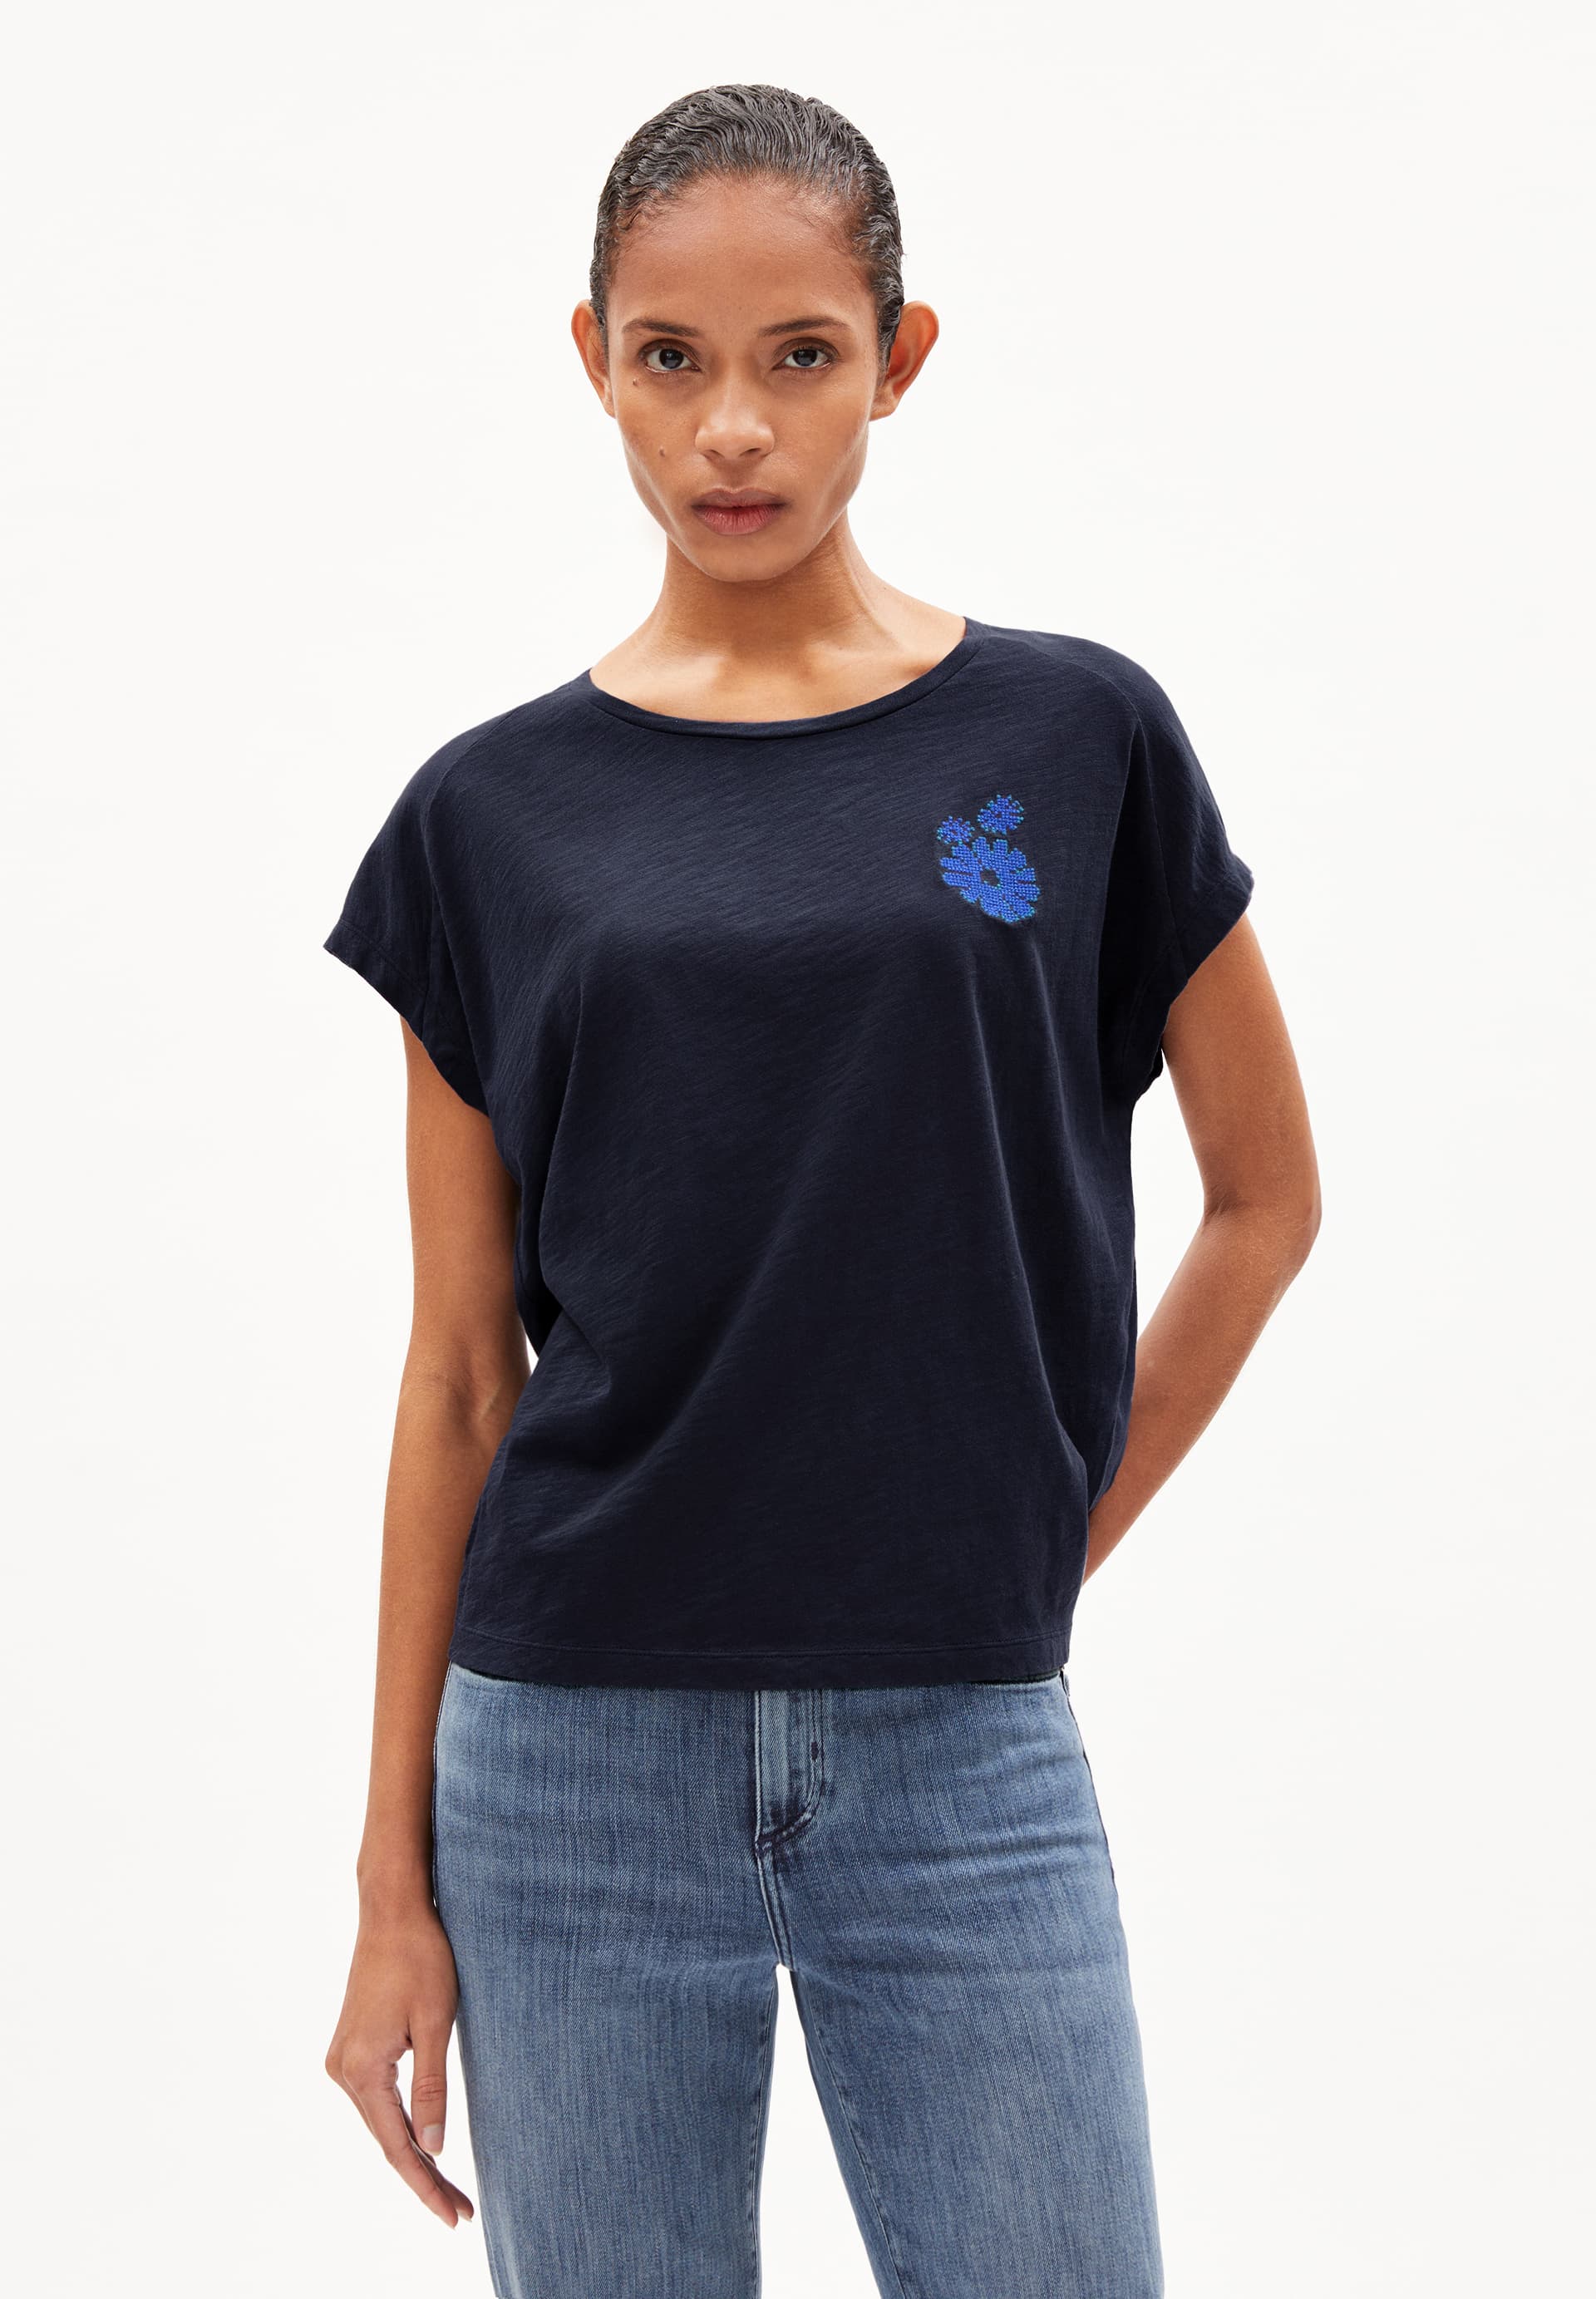 ONELIAA FAANCY T-Shirt  Loose Fit made of Organic Cotton